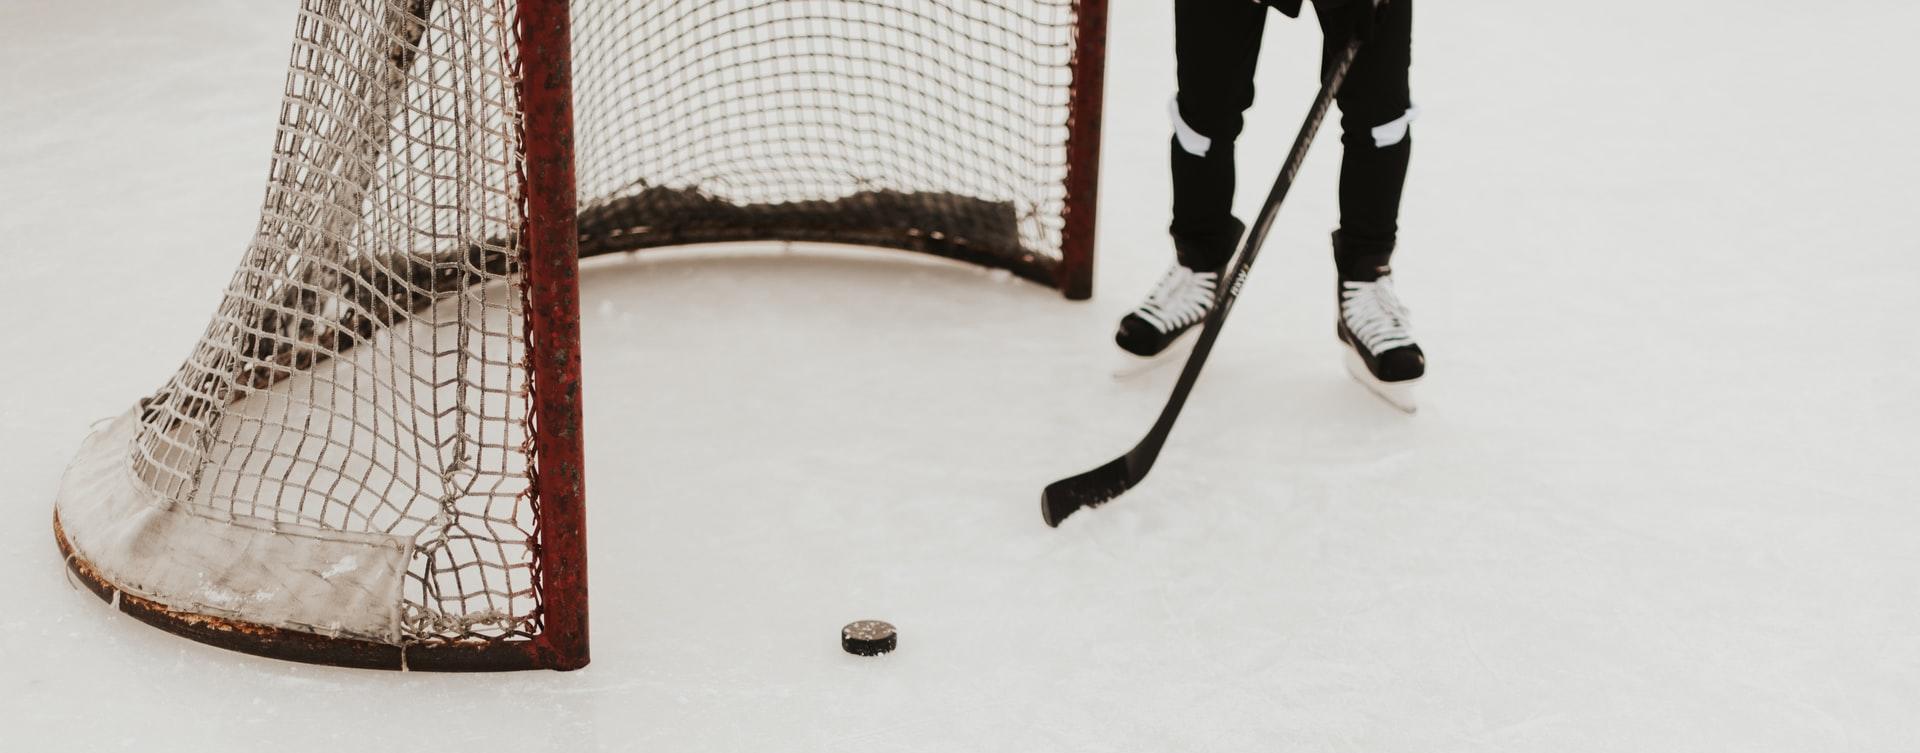 A hockey net on an ice rink, with a puck in front of the net and a person on skates holding a stick, but you can only see the person's legs and the stick.